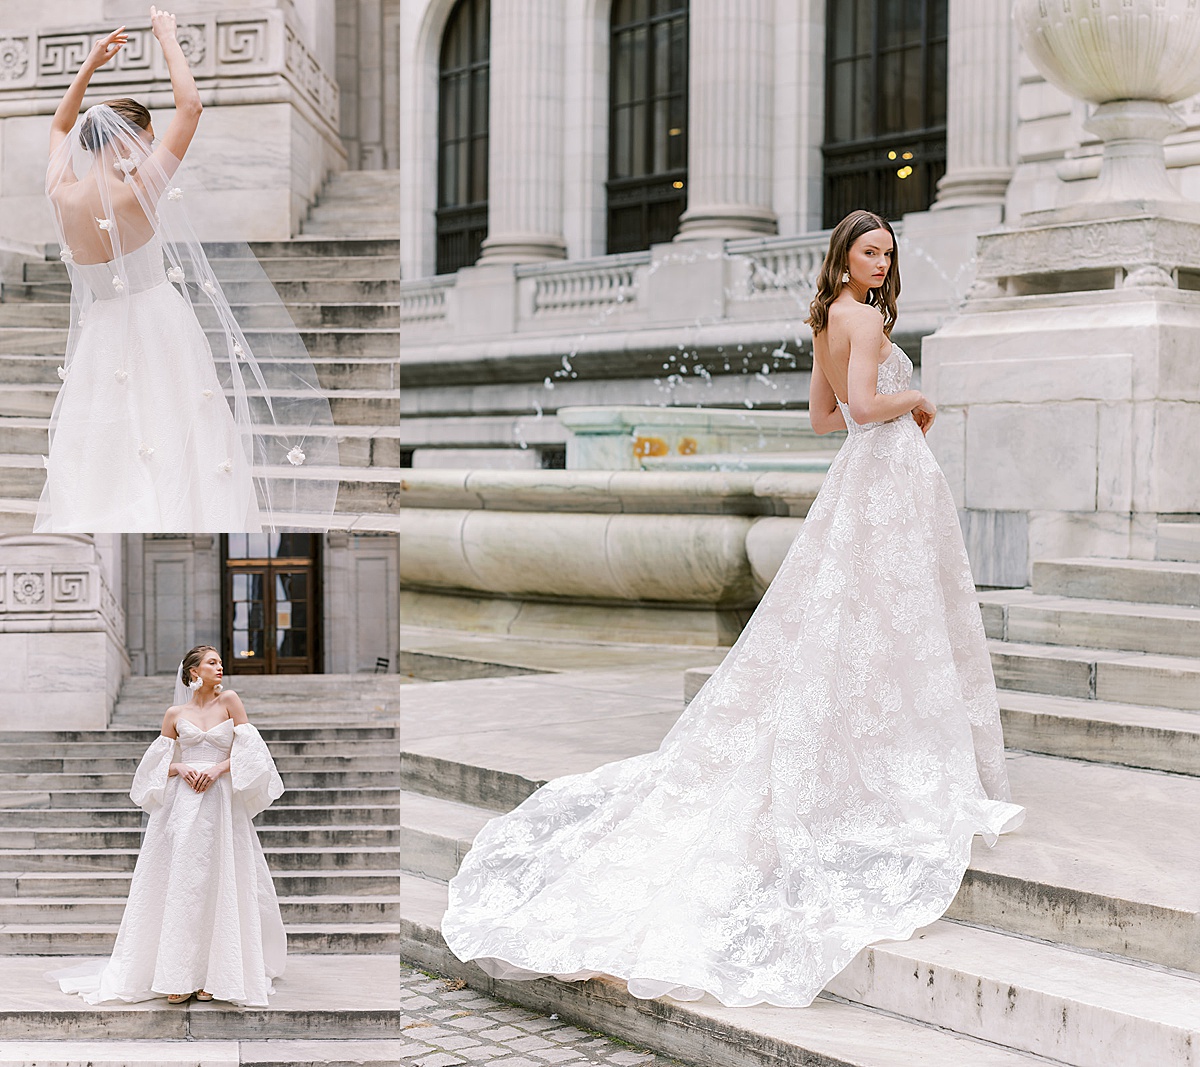 women pose in elegant bridal gowns for Beccar couture lookbook shoot in New York City